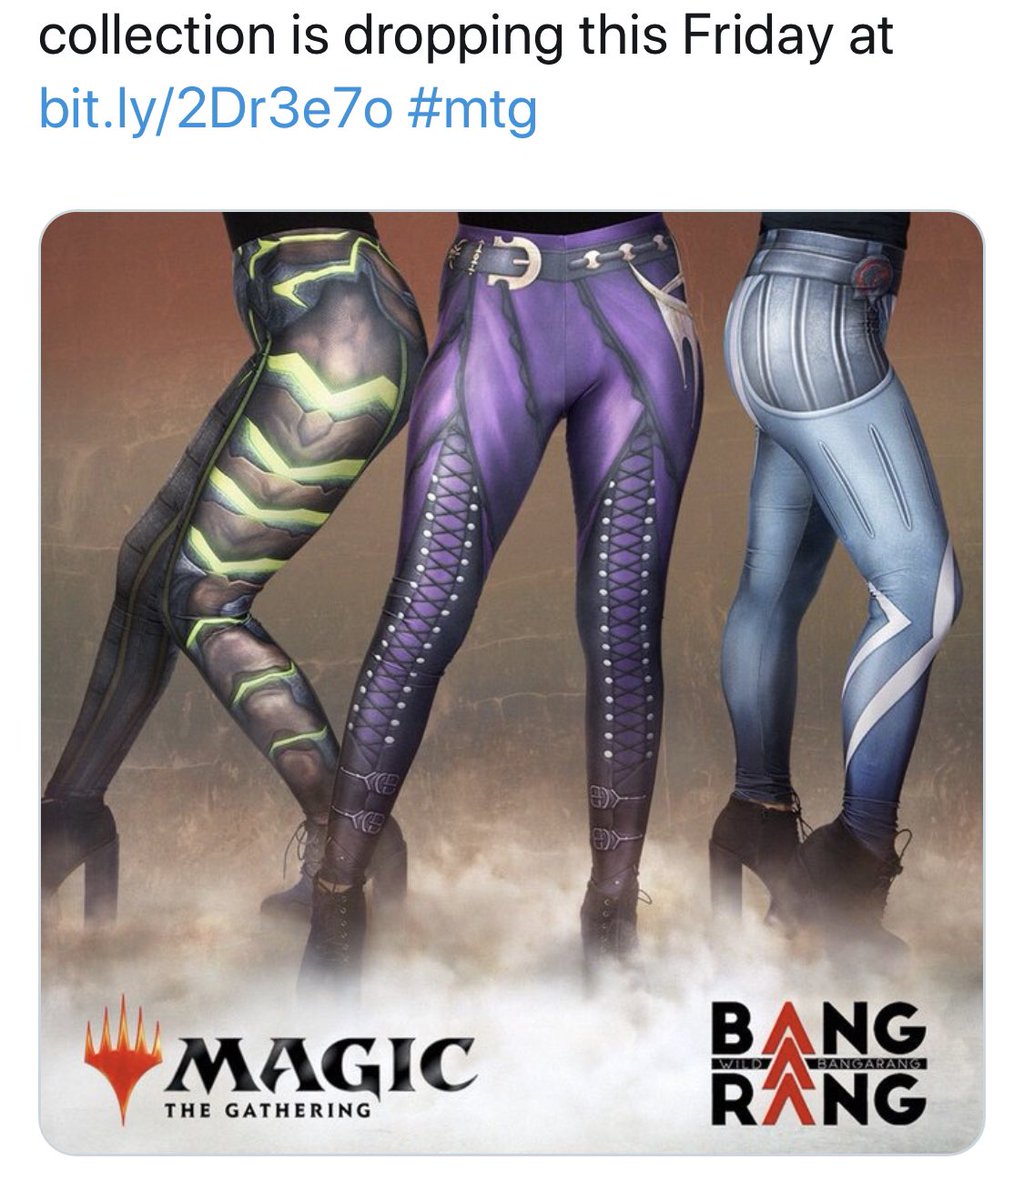 I will be exclusively wearing MAGIC PANTS from now on